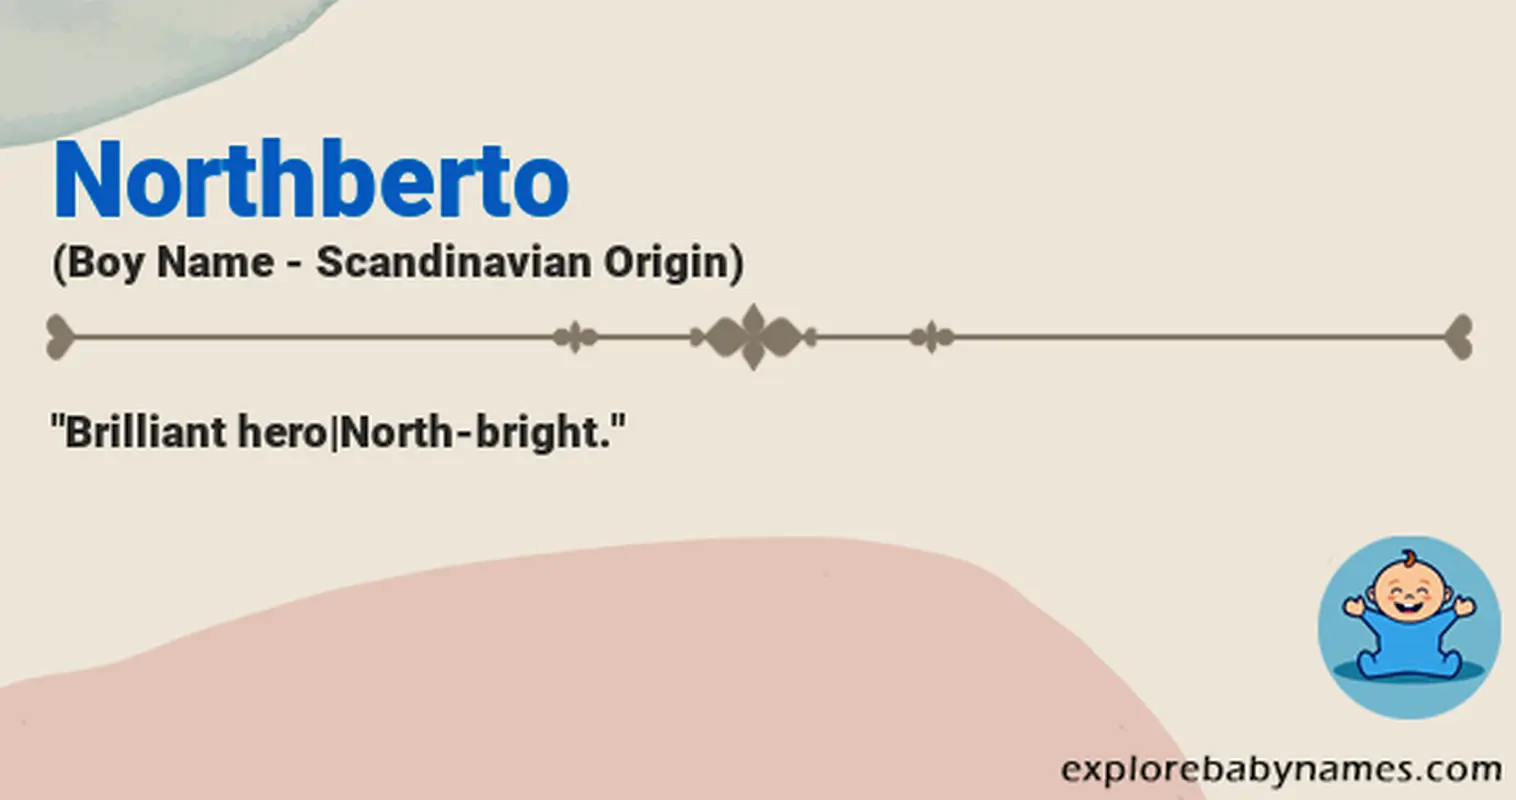 Meaning of Northberto